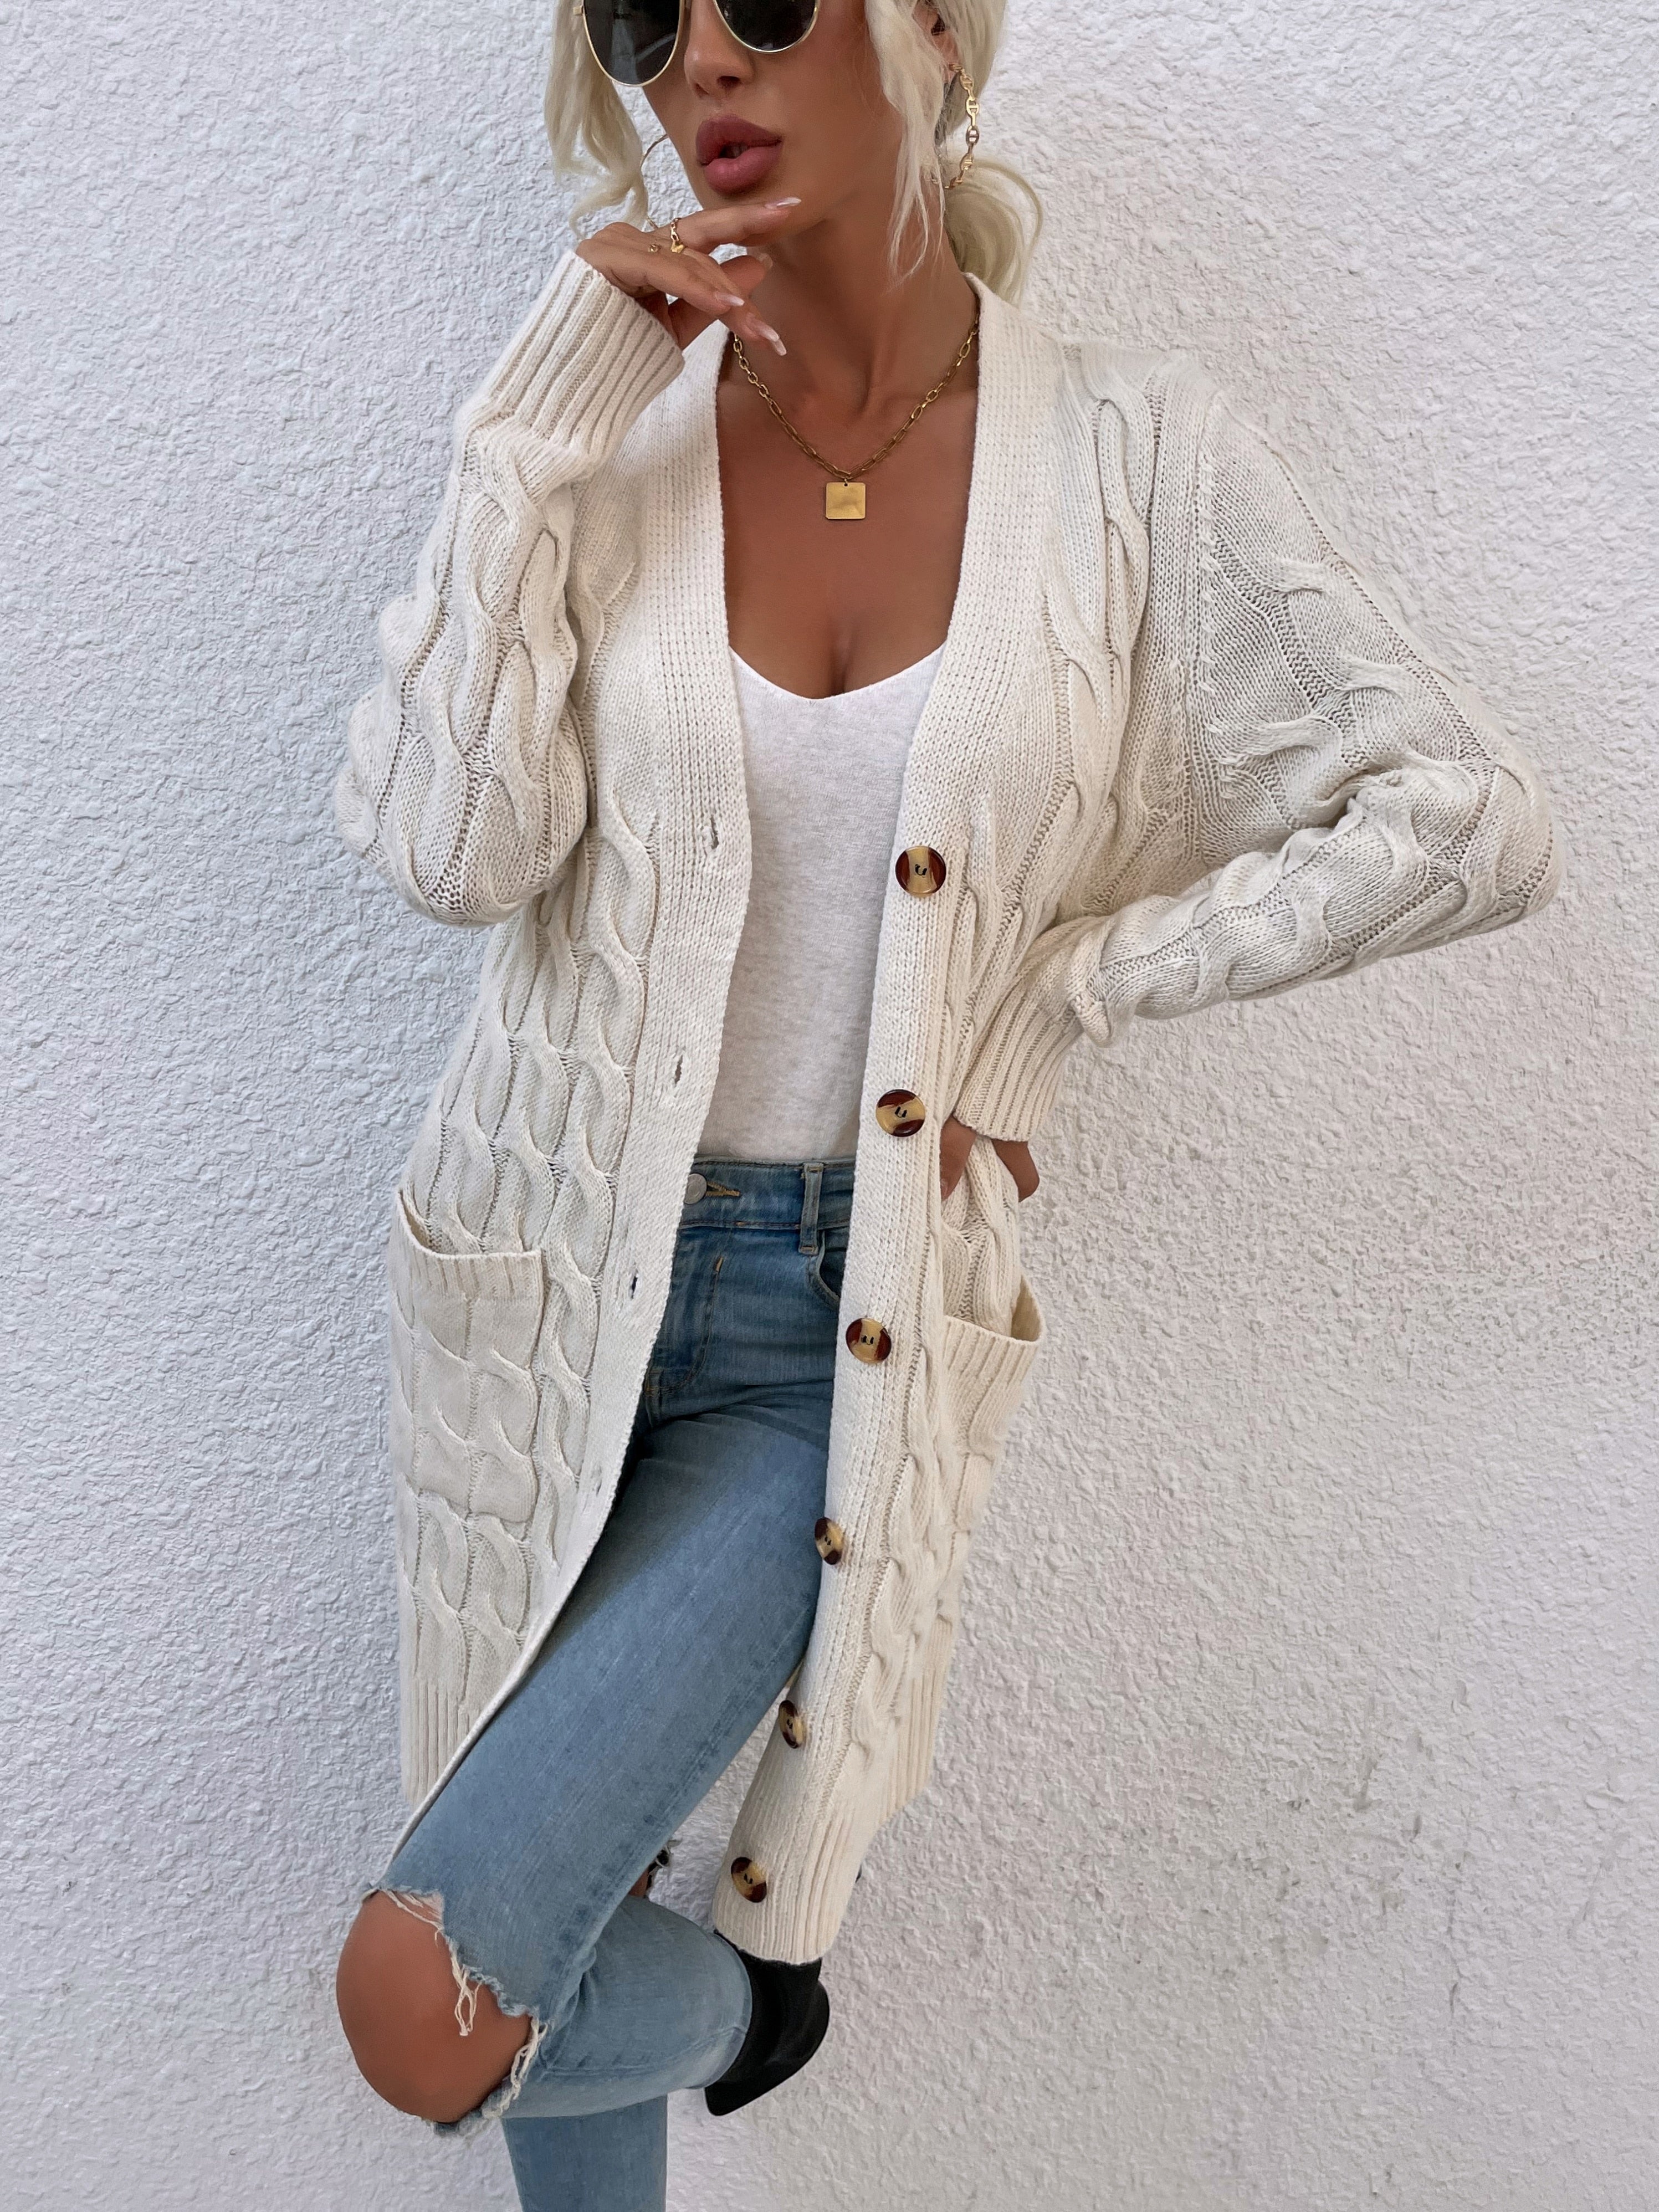 Women's Cardigan Sweater Autumn and Winter New Long Coat Twisted Rope Solid Color Knitted Sweaters Women